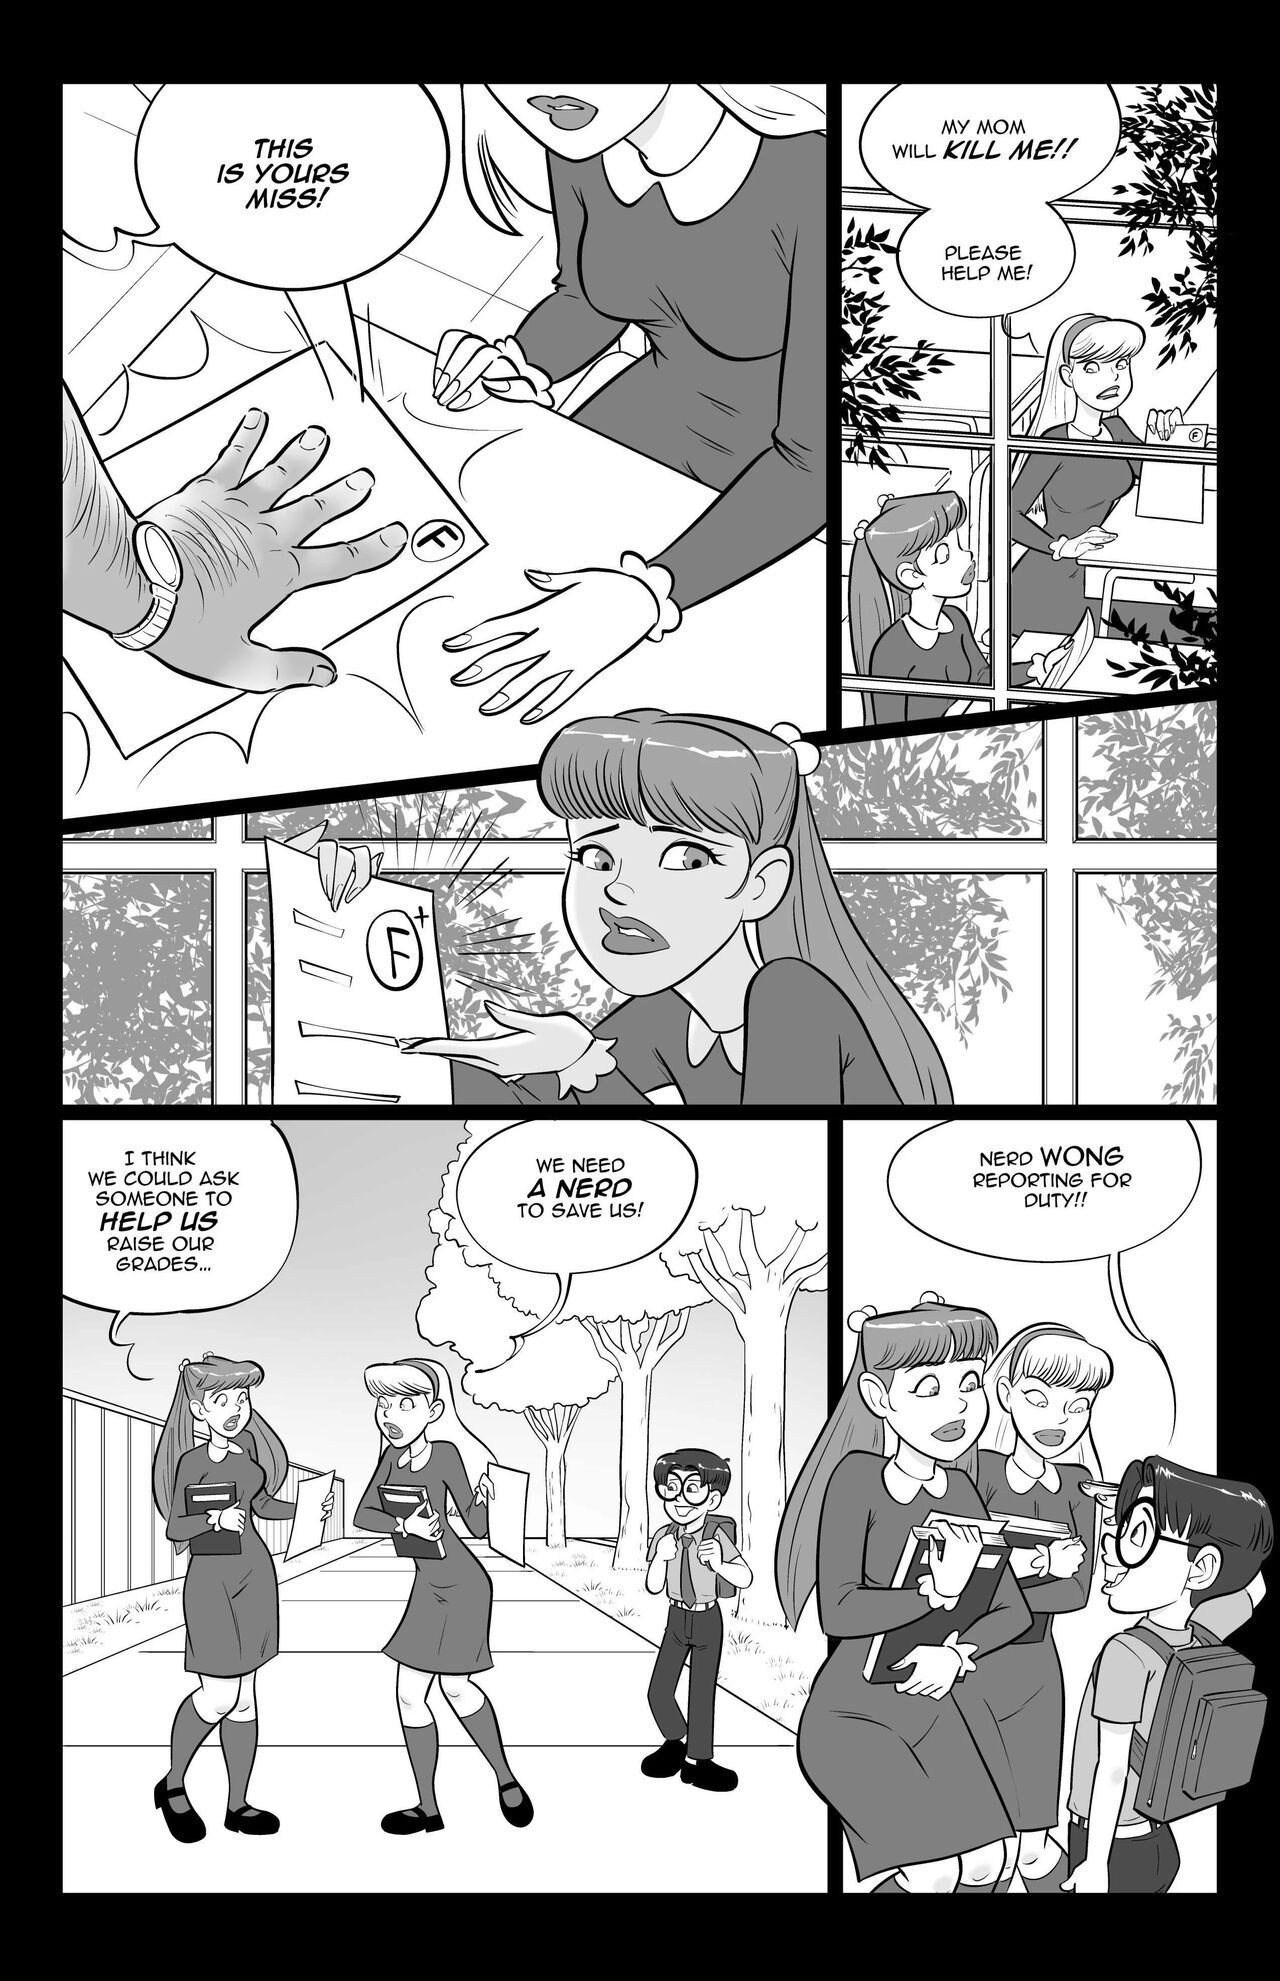 Helping With Grades Porn Comic english 02